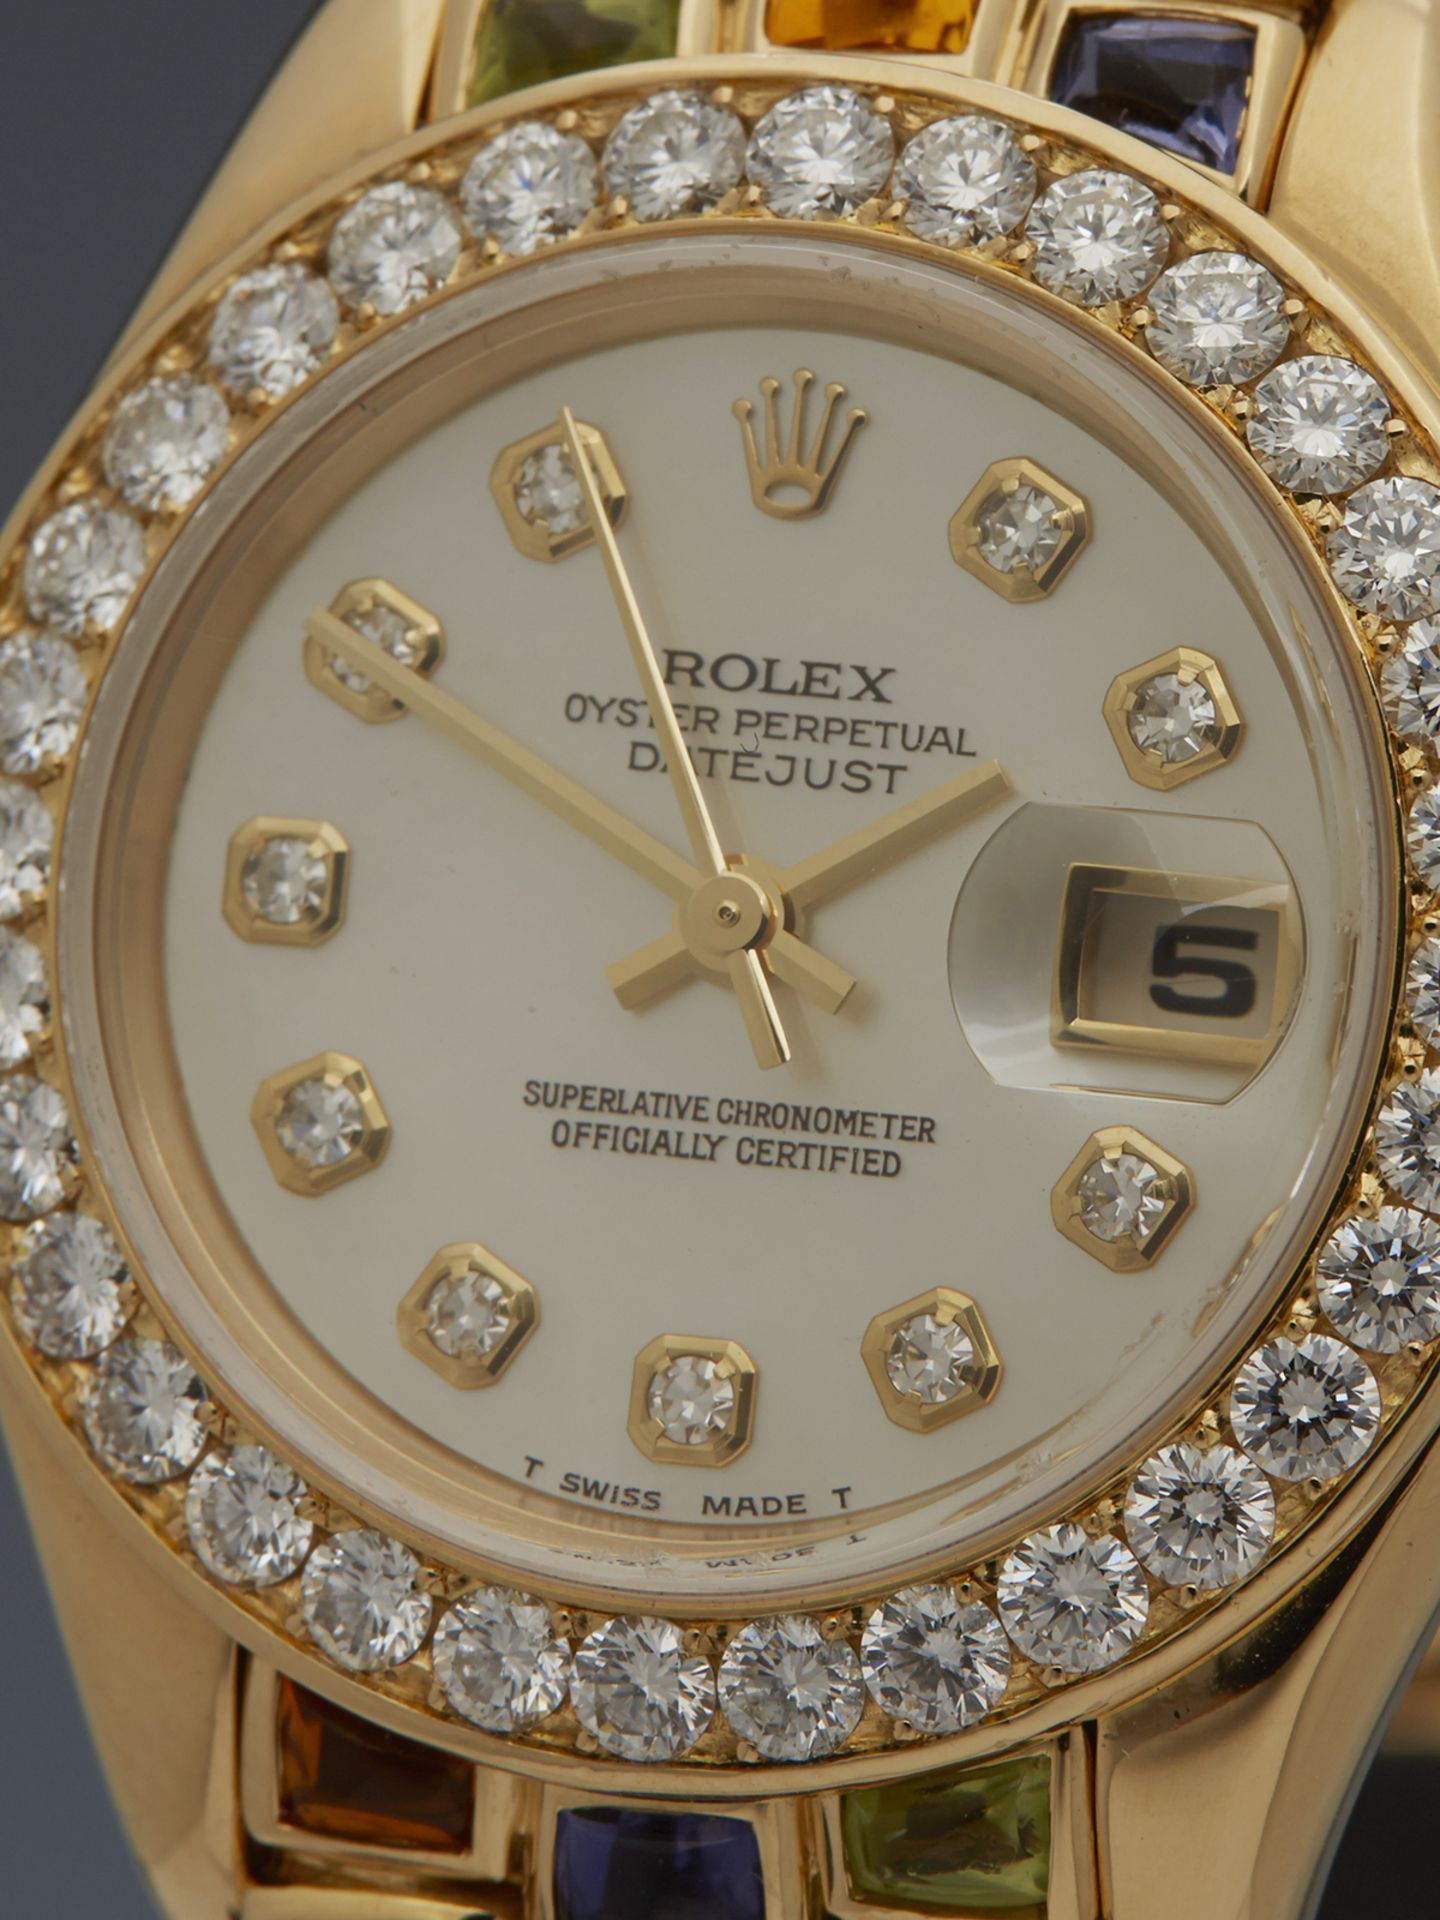 Rolex, Pearlmaster 69298 Diamonds & Precious Gems Limited Edition for the Dubai Royal Family - Image 2 of 11